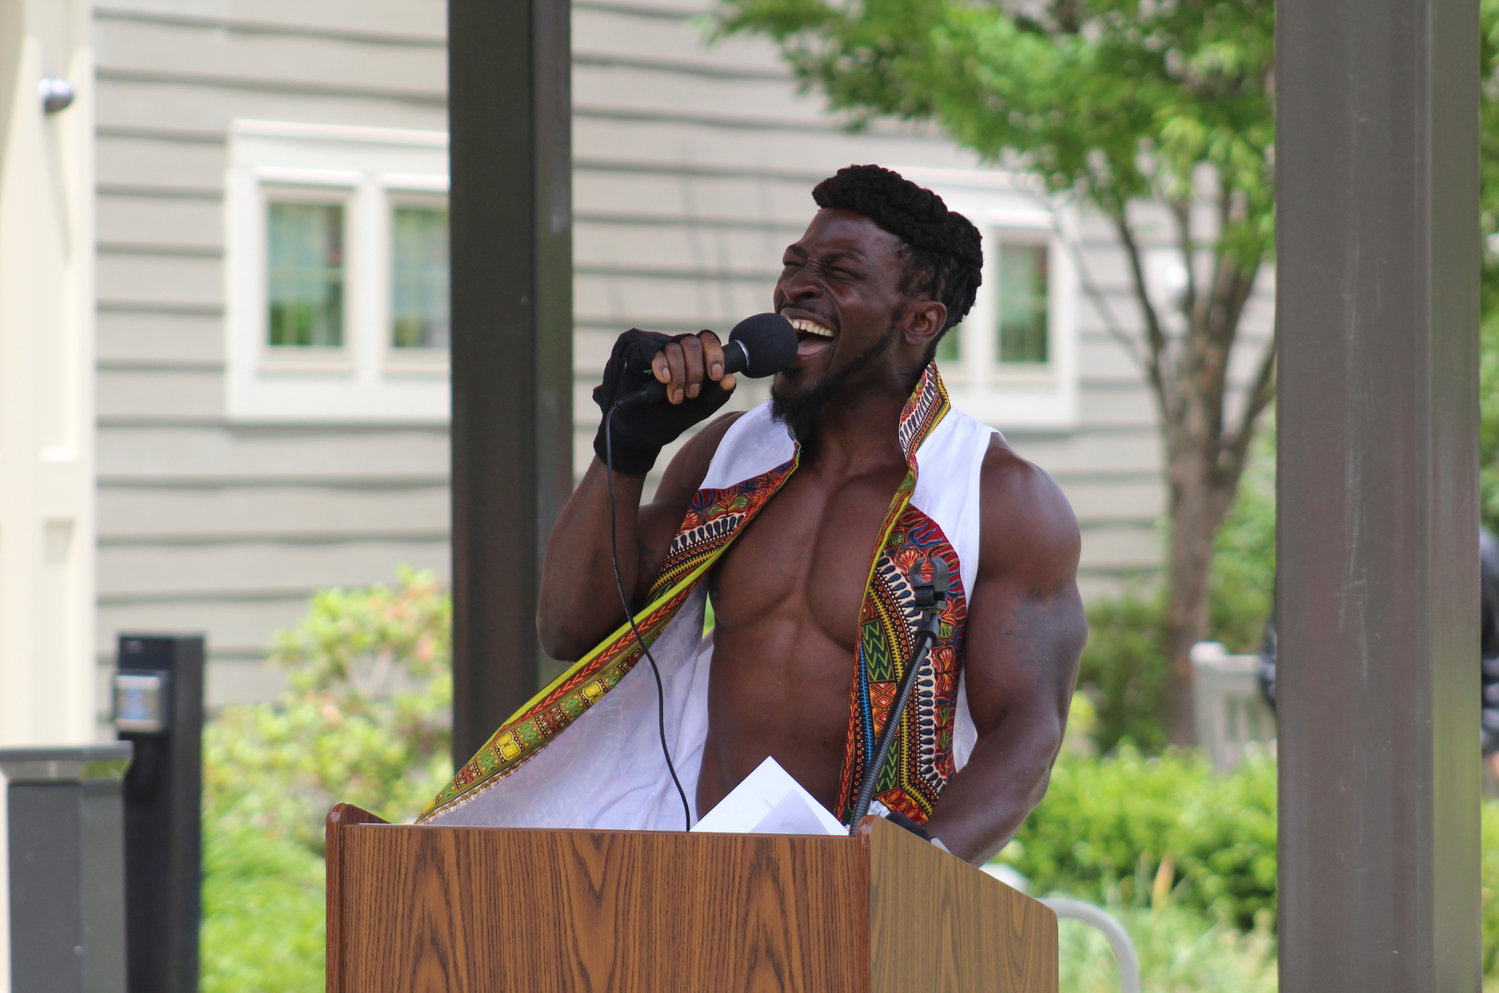 The day’s keynote address was entrepreneur and motivational speaker Damola Akinyemi, who spoke about the history of Juneteenth and carrying its lessons with us today.